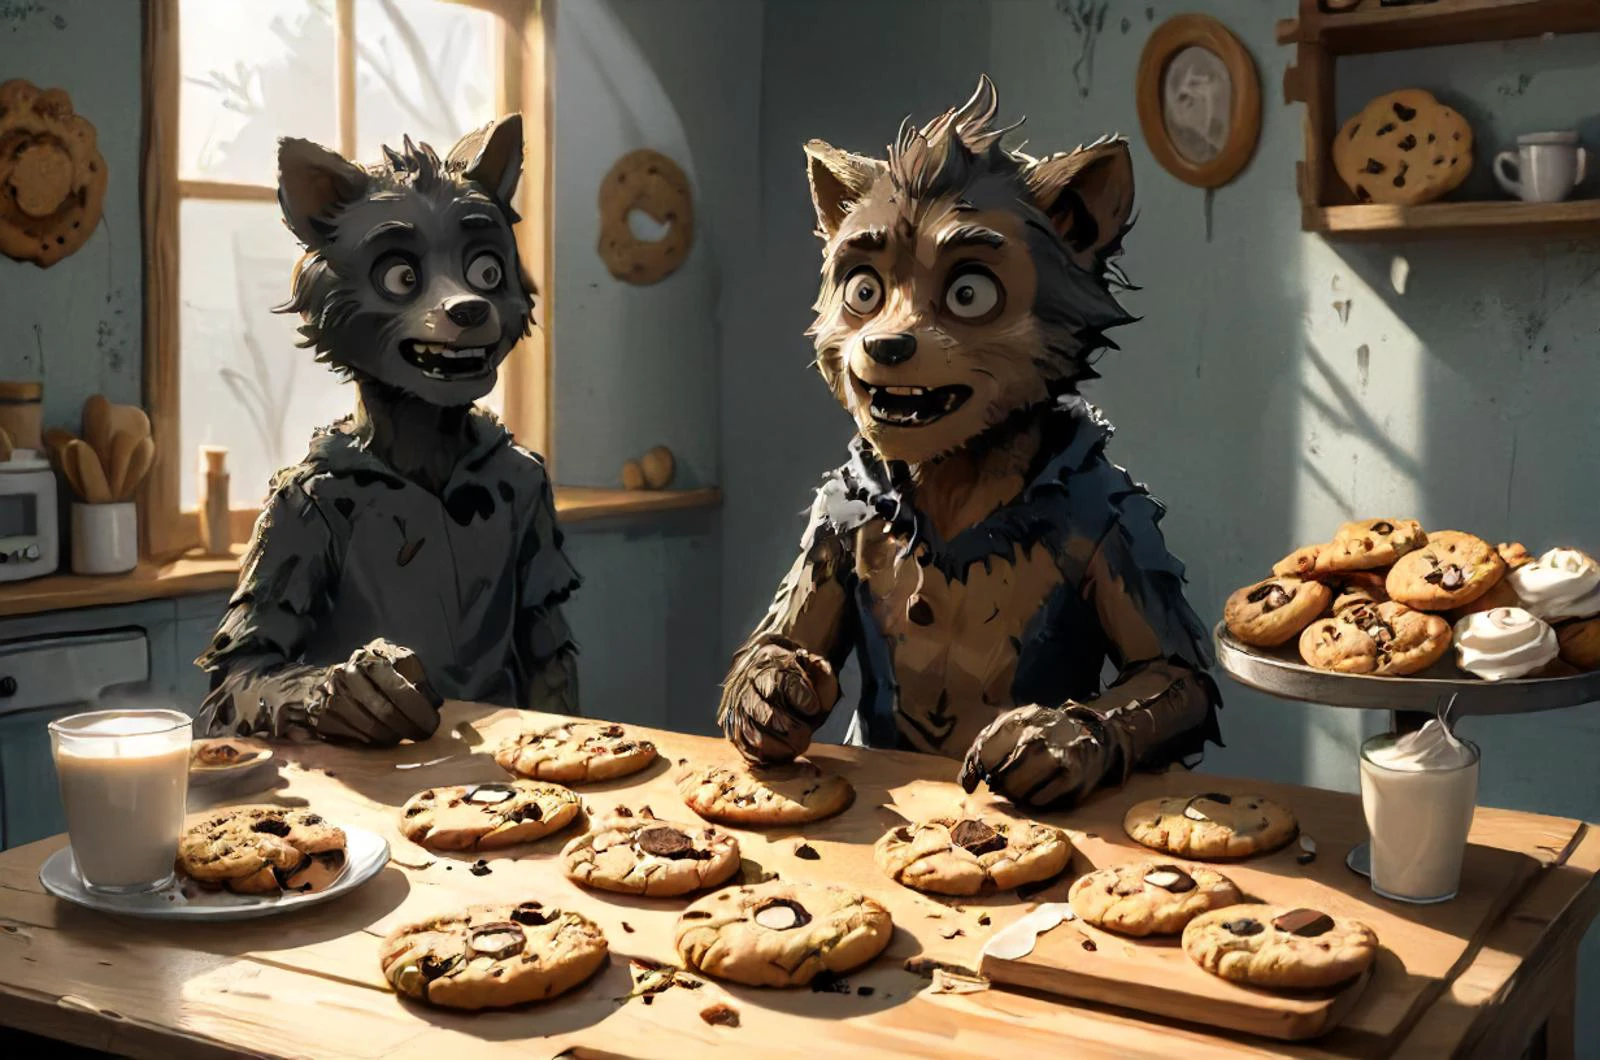 friendly werewolf offering cookies, bakery, self-made, mess, detailed shadows, questionable source,  